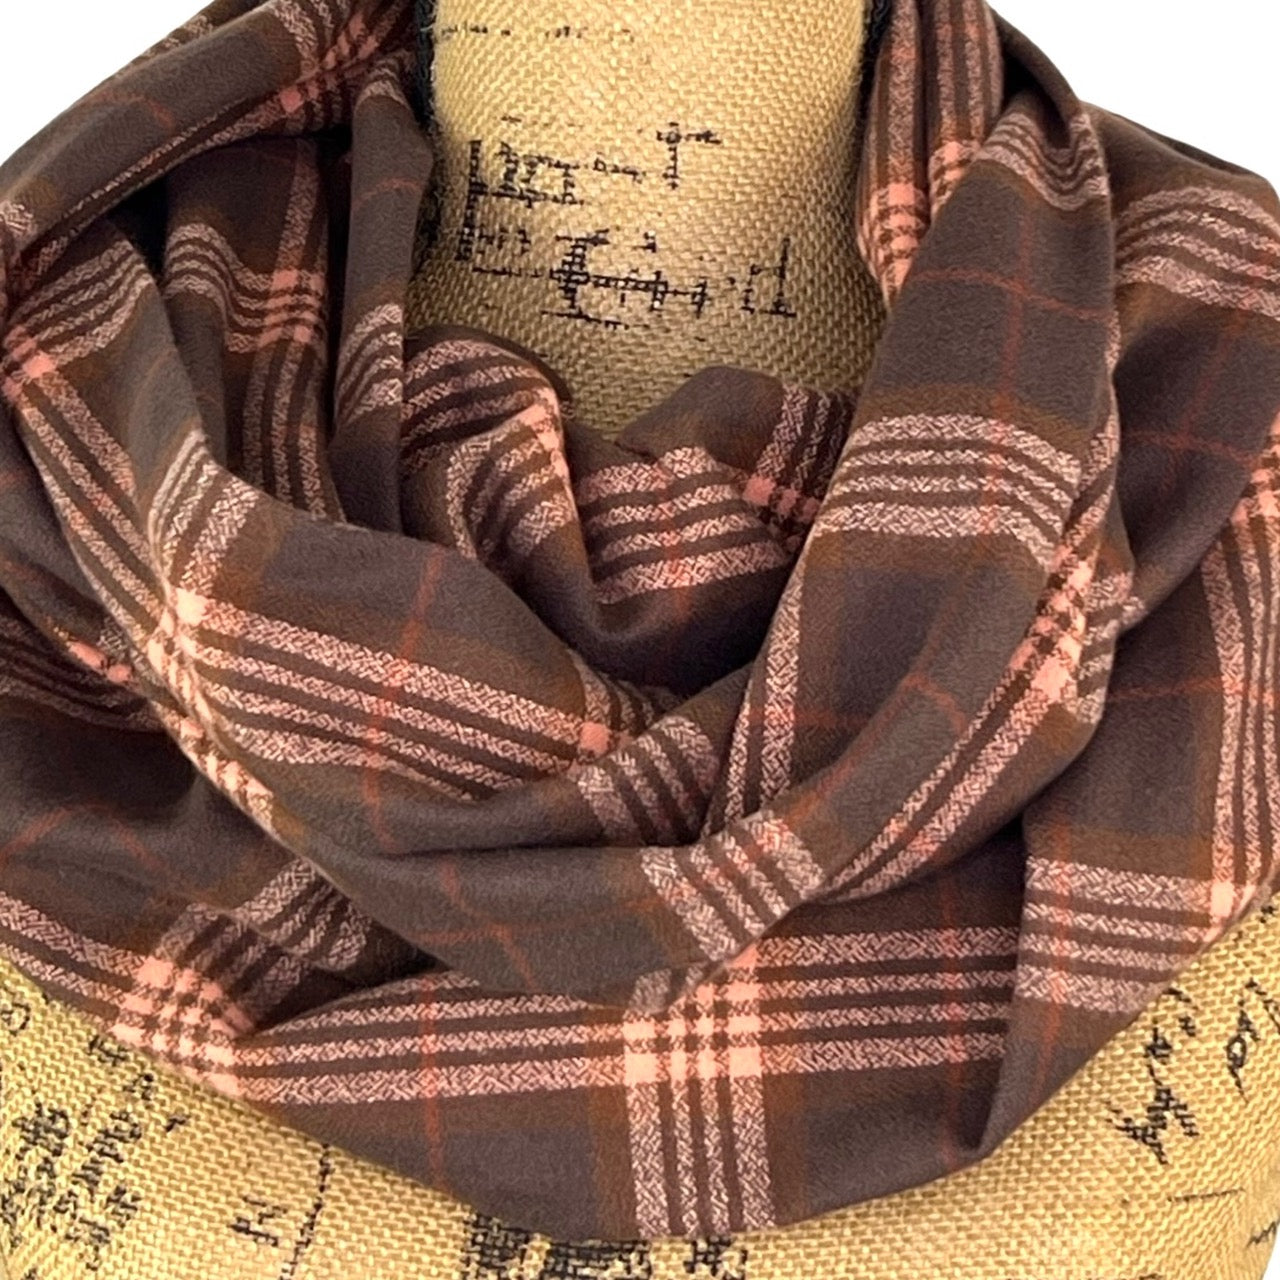 100% Organic Cotton Dark and Milk Chocolate Browns with Muted Pink and Rust Accent Plaid Infinity and Blanket Scarves